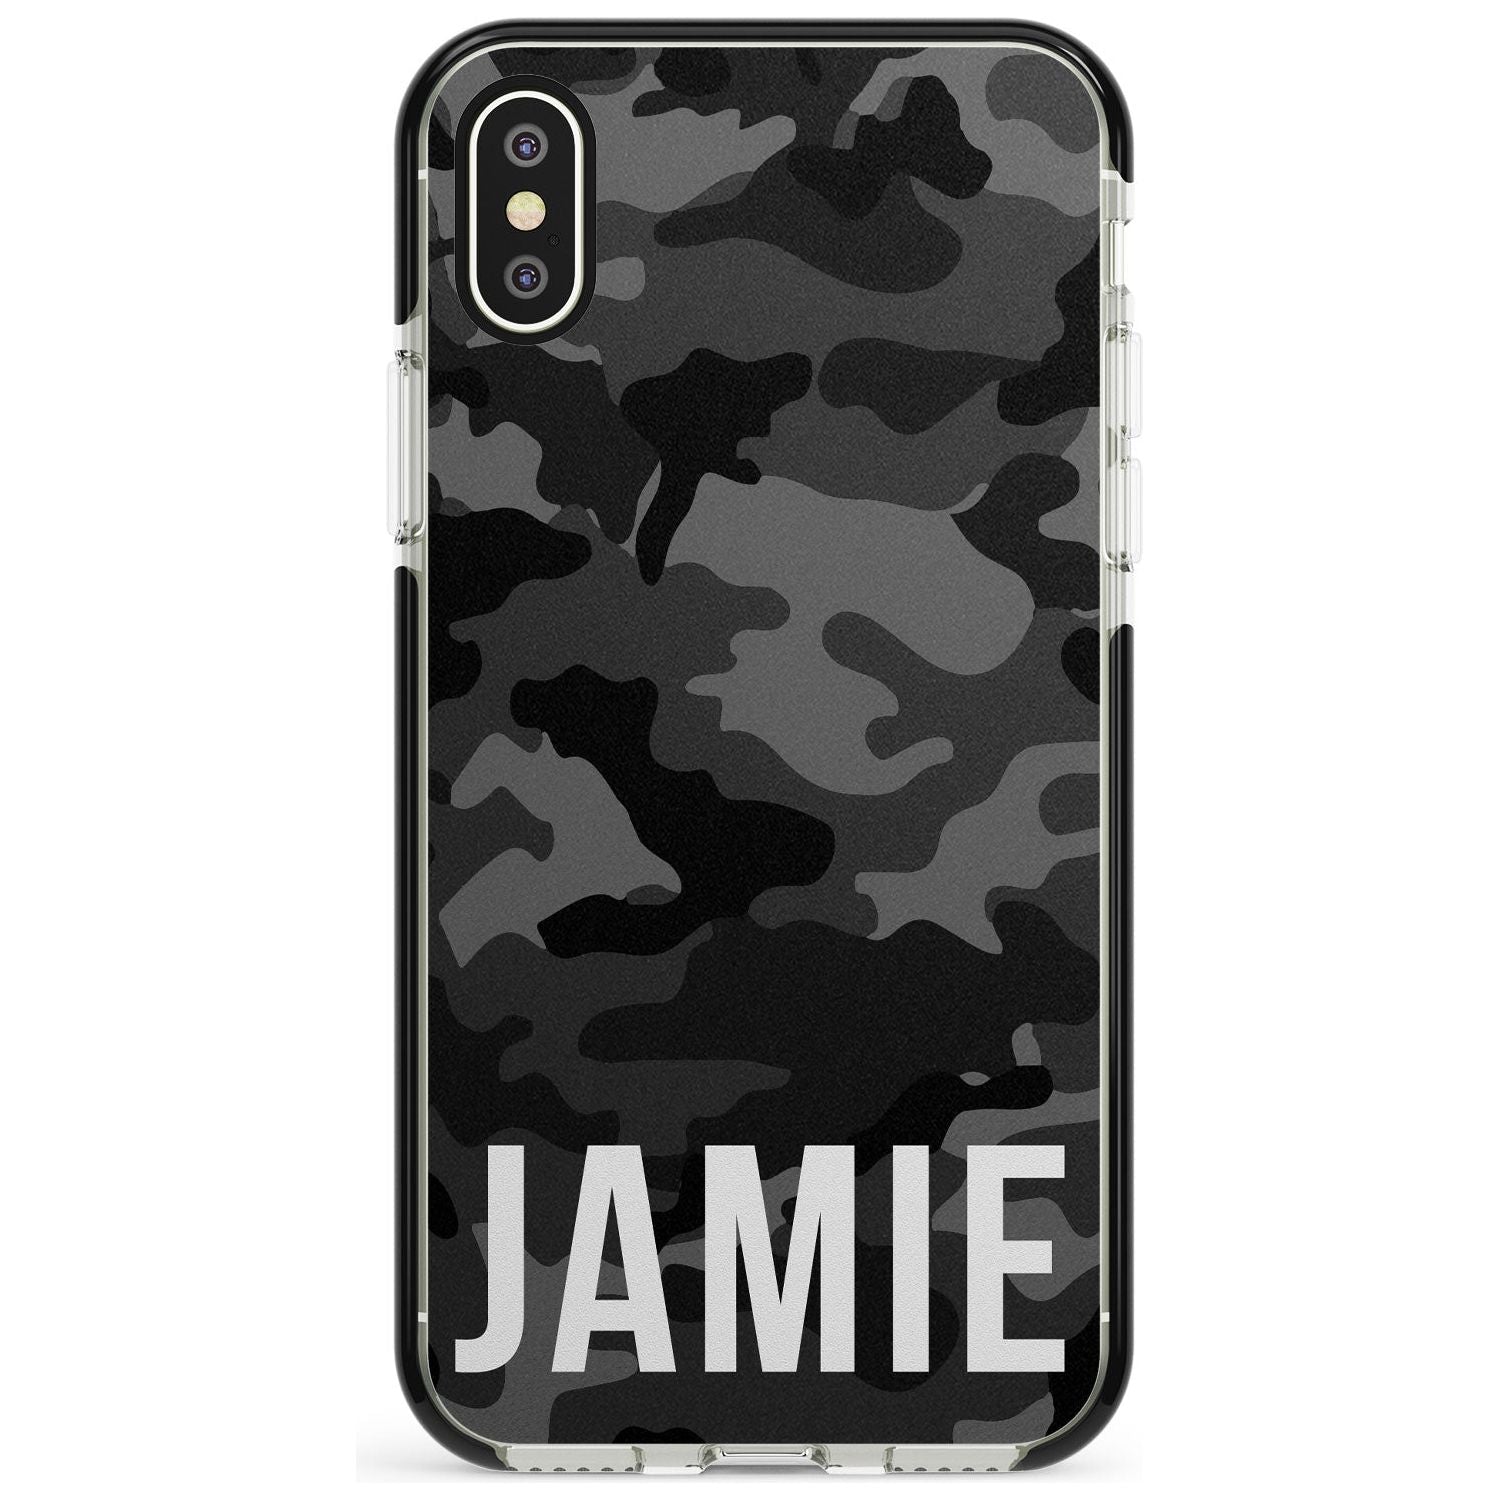 Horizontal Name Personalised Black Camouflage Black Impact Phone Case for iPhone X XS Max XR